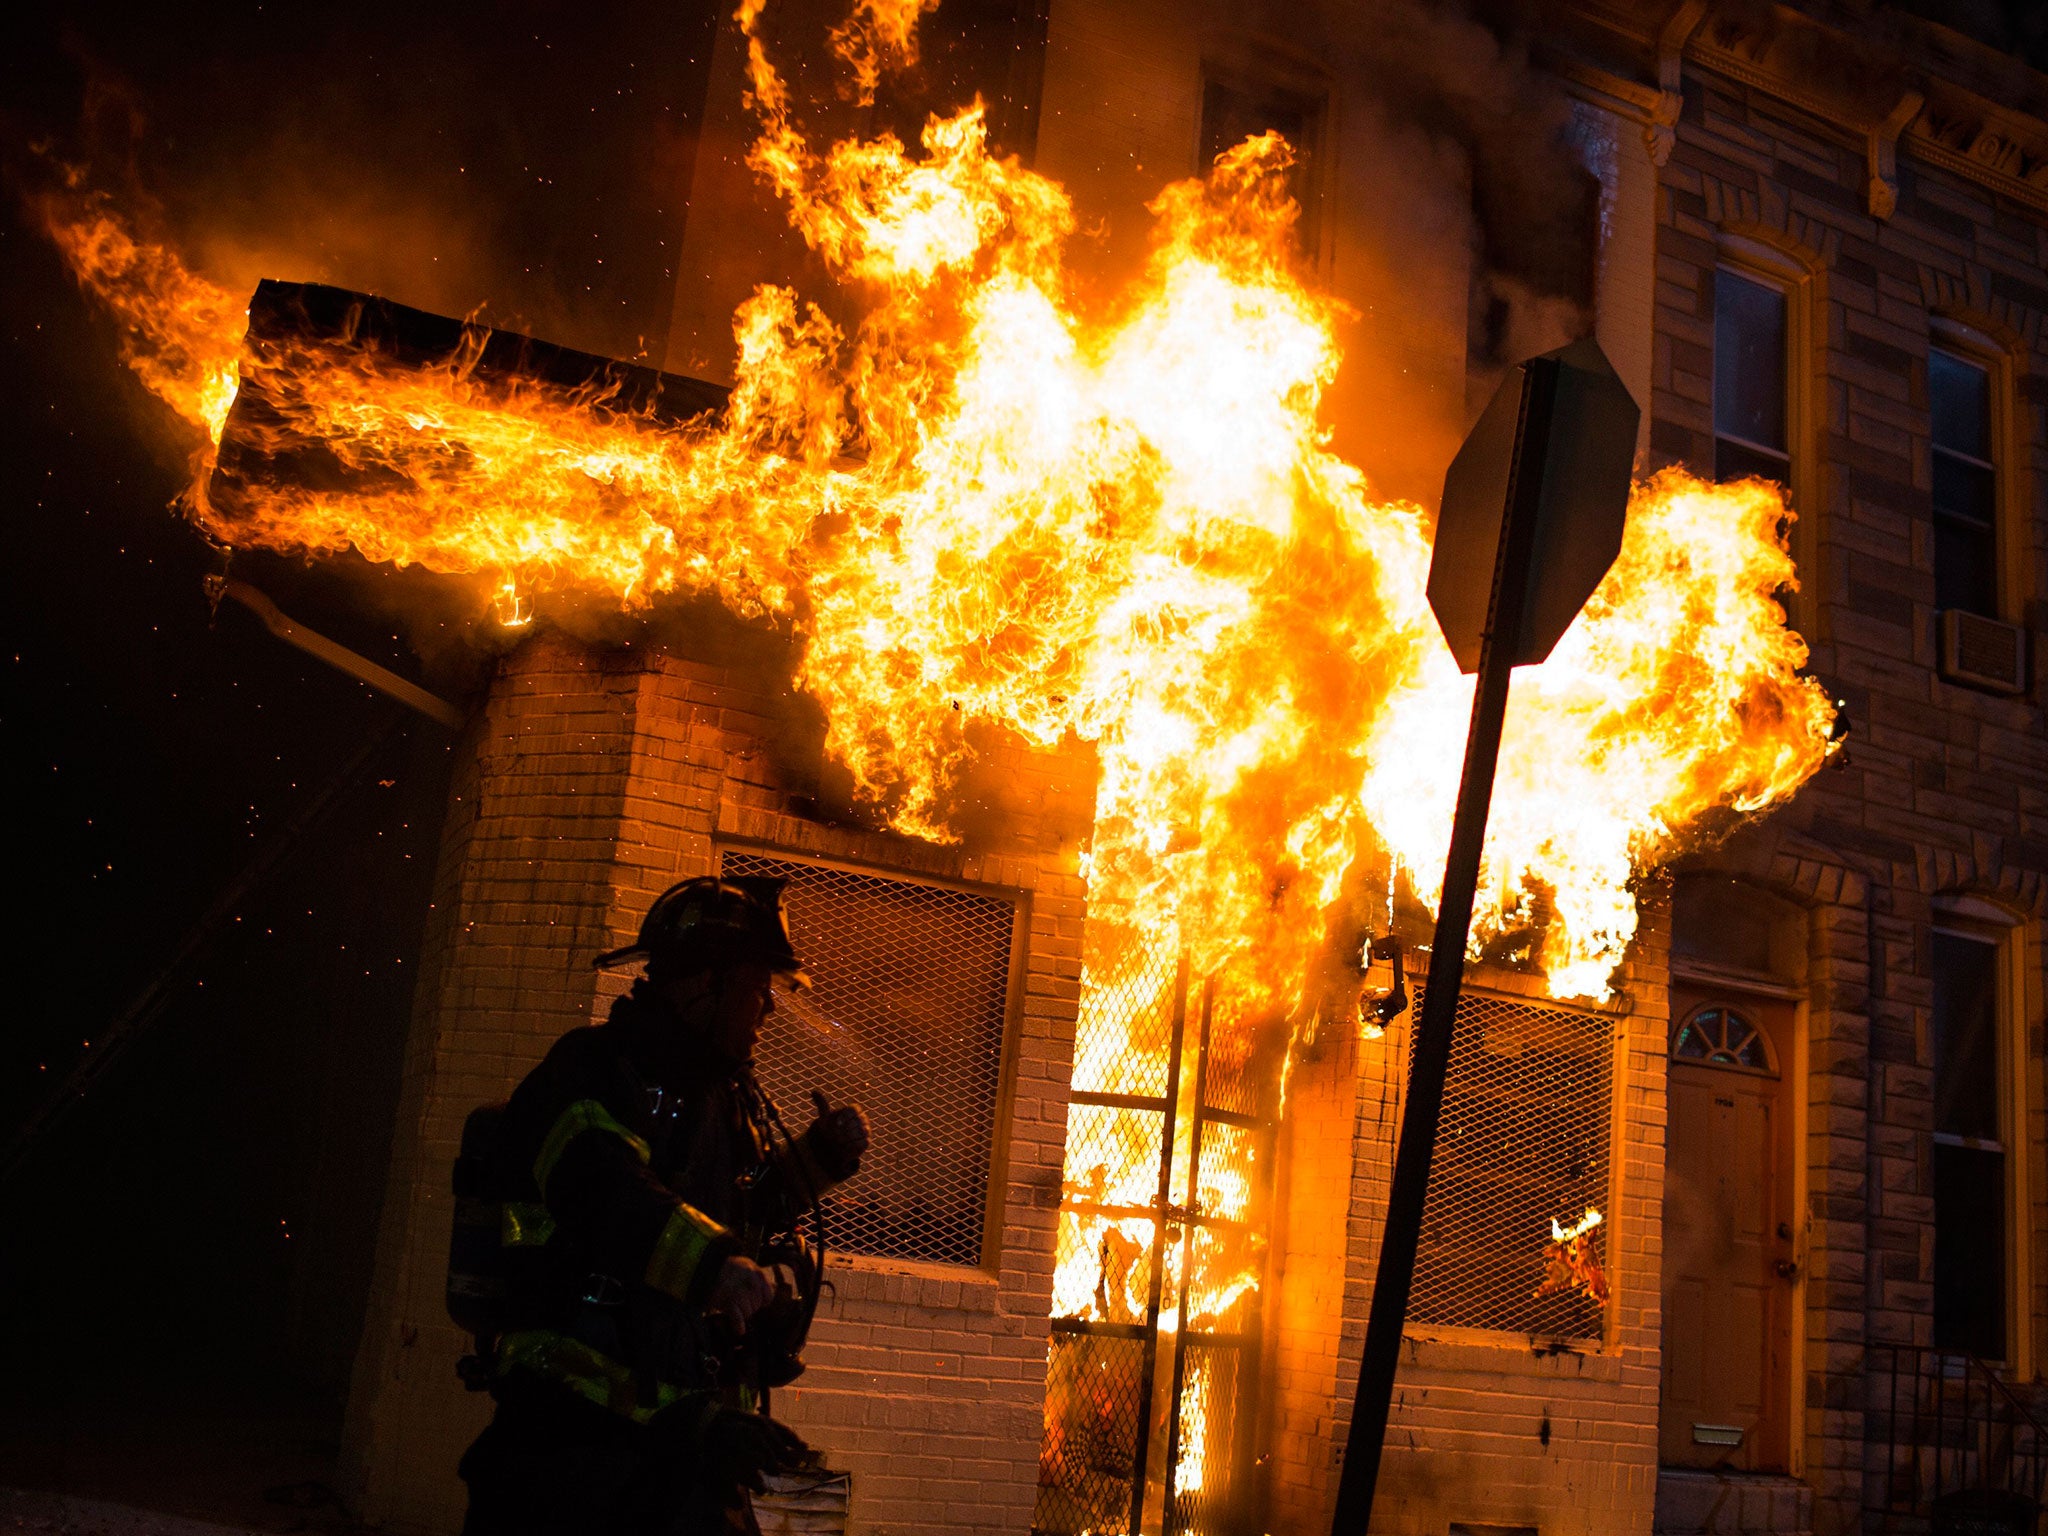 Police and firefighters respond in front of a building that caught fire as protests of the death of Freddie Gray continue in Baltimore